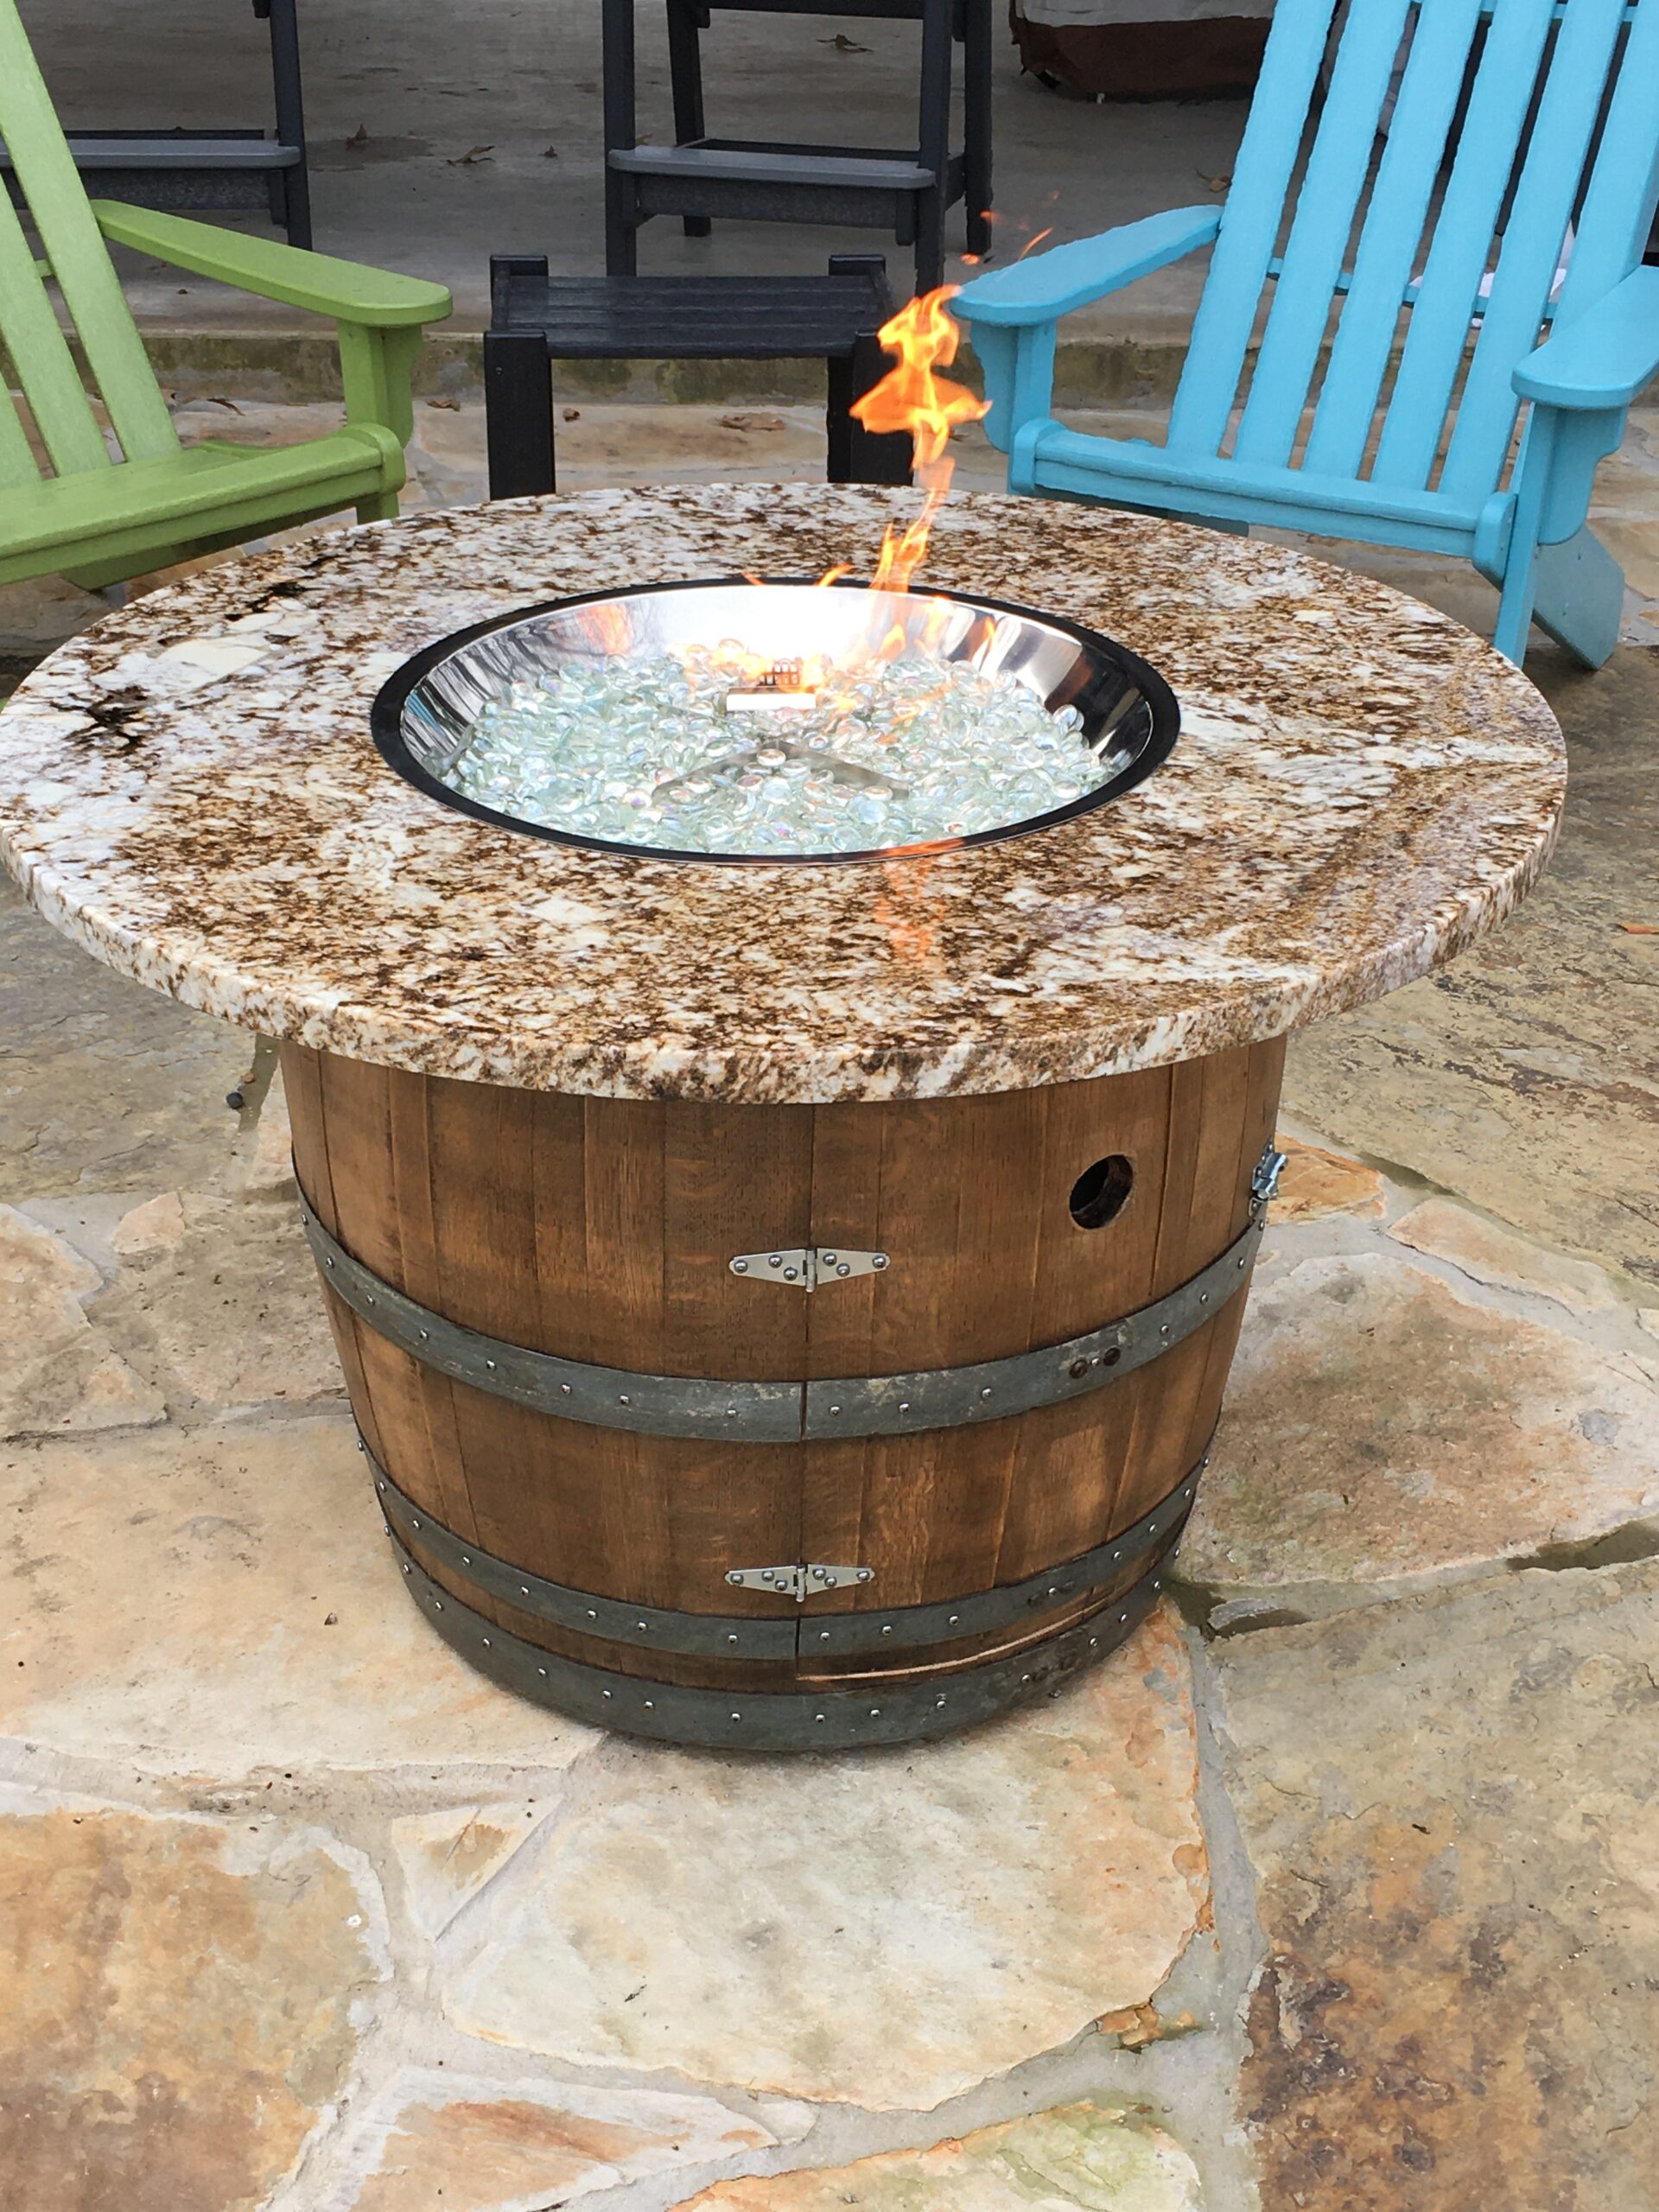 Standard Wine Barrel Fire Table Starting at $1899.00 plus tax and shipping.